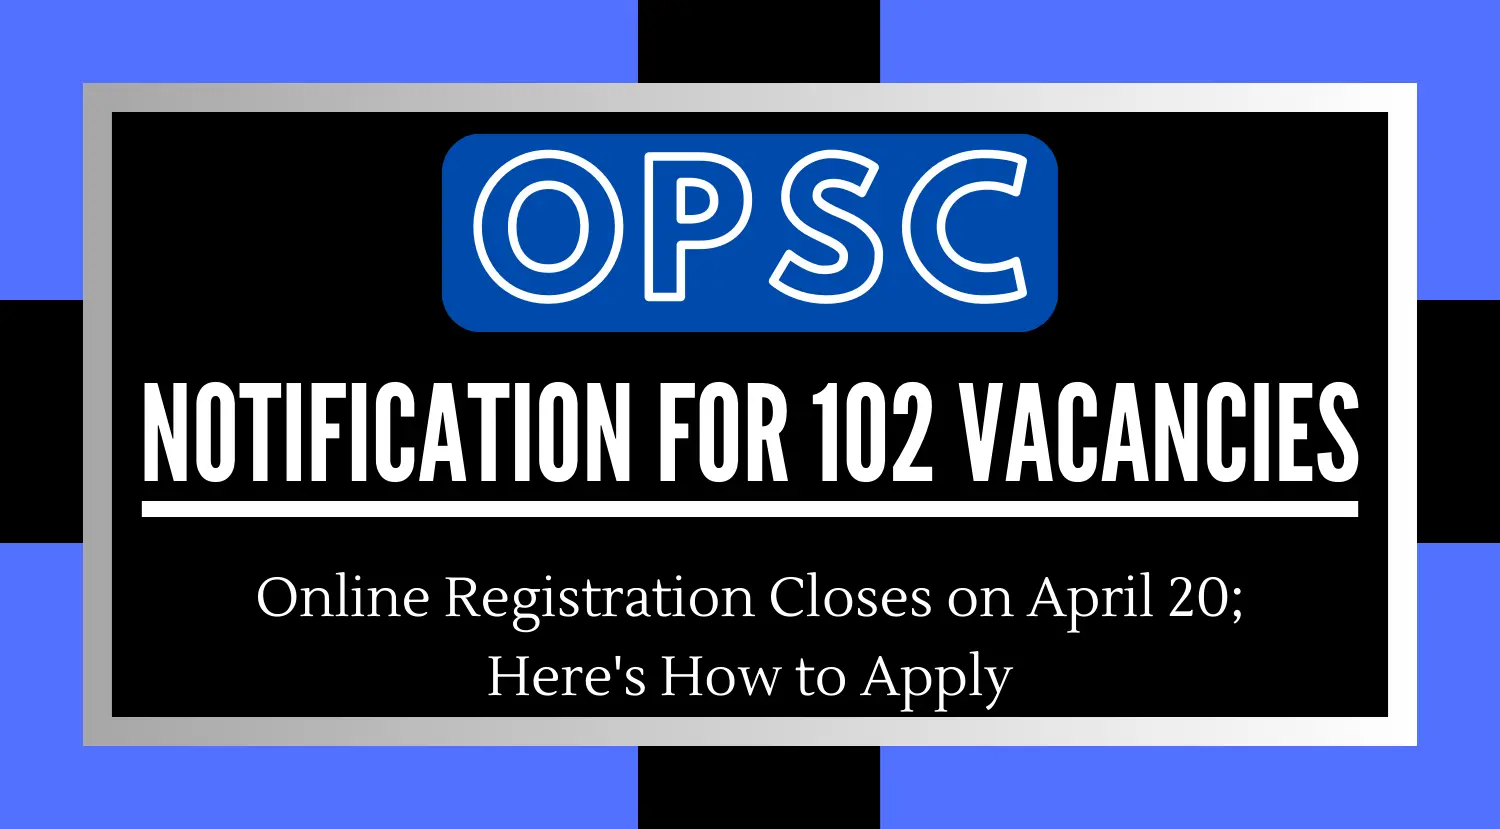 OPSC Notification for 102 Vacancies Registration Closes on April 20th - Apply Now